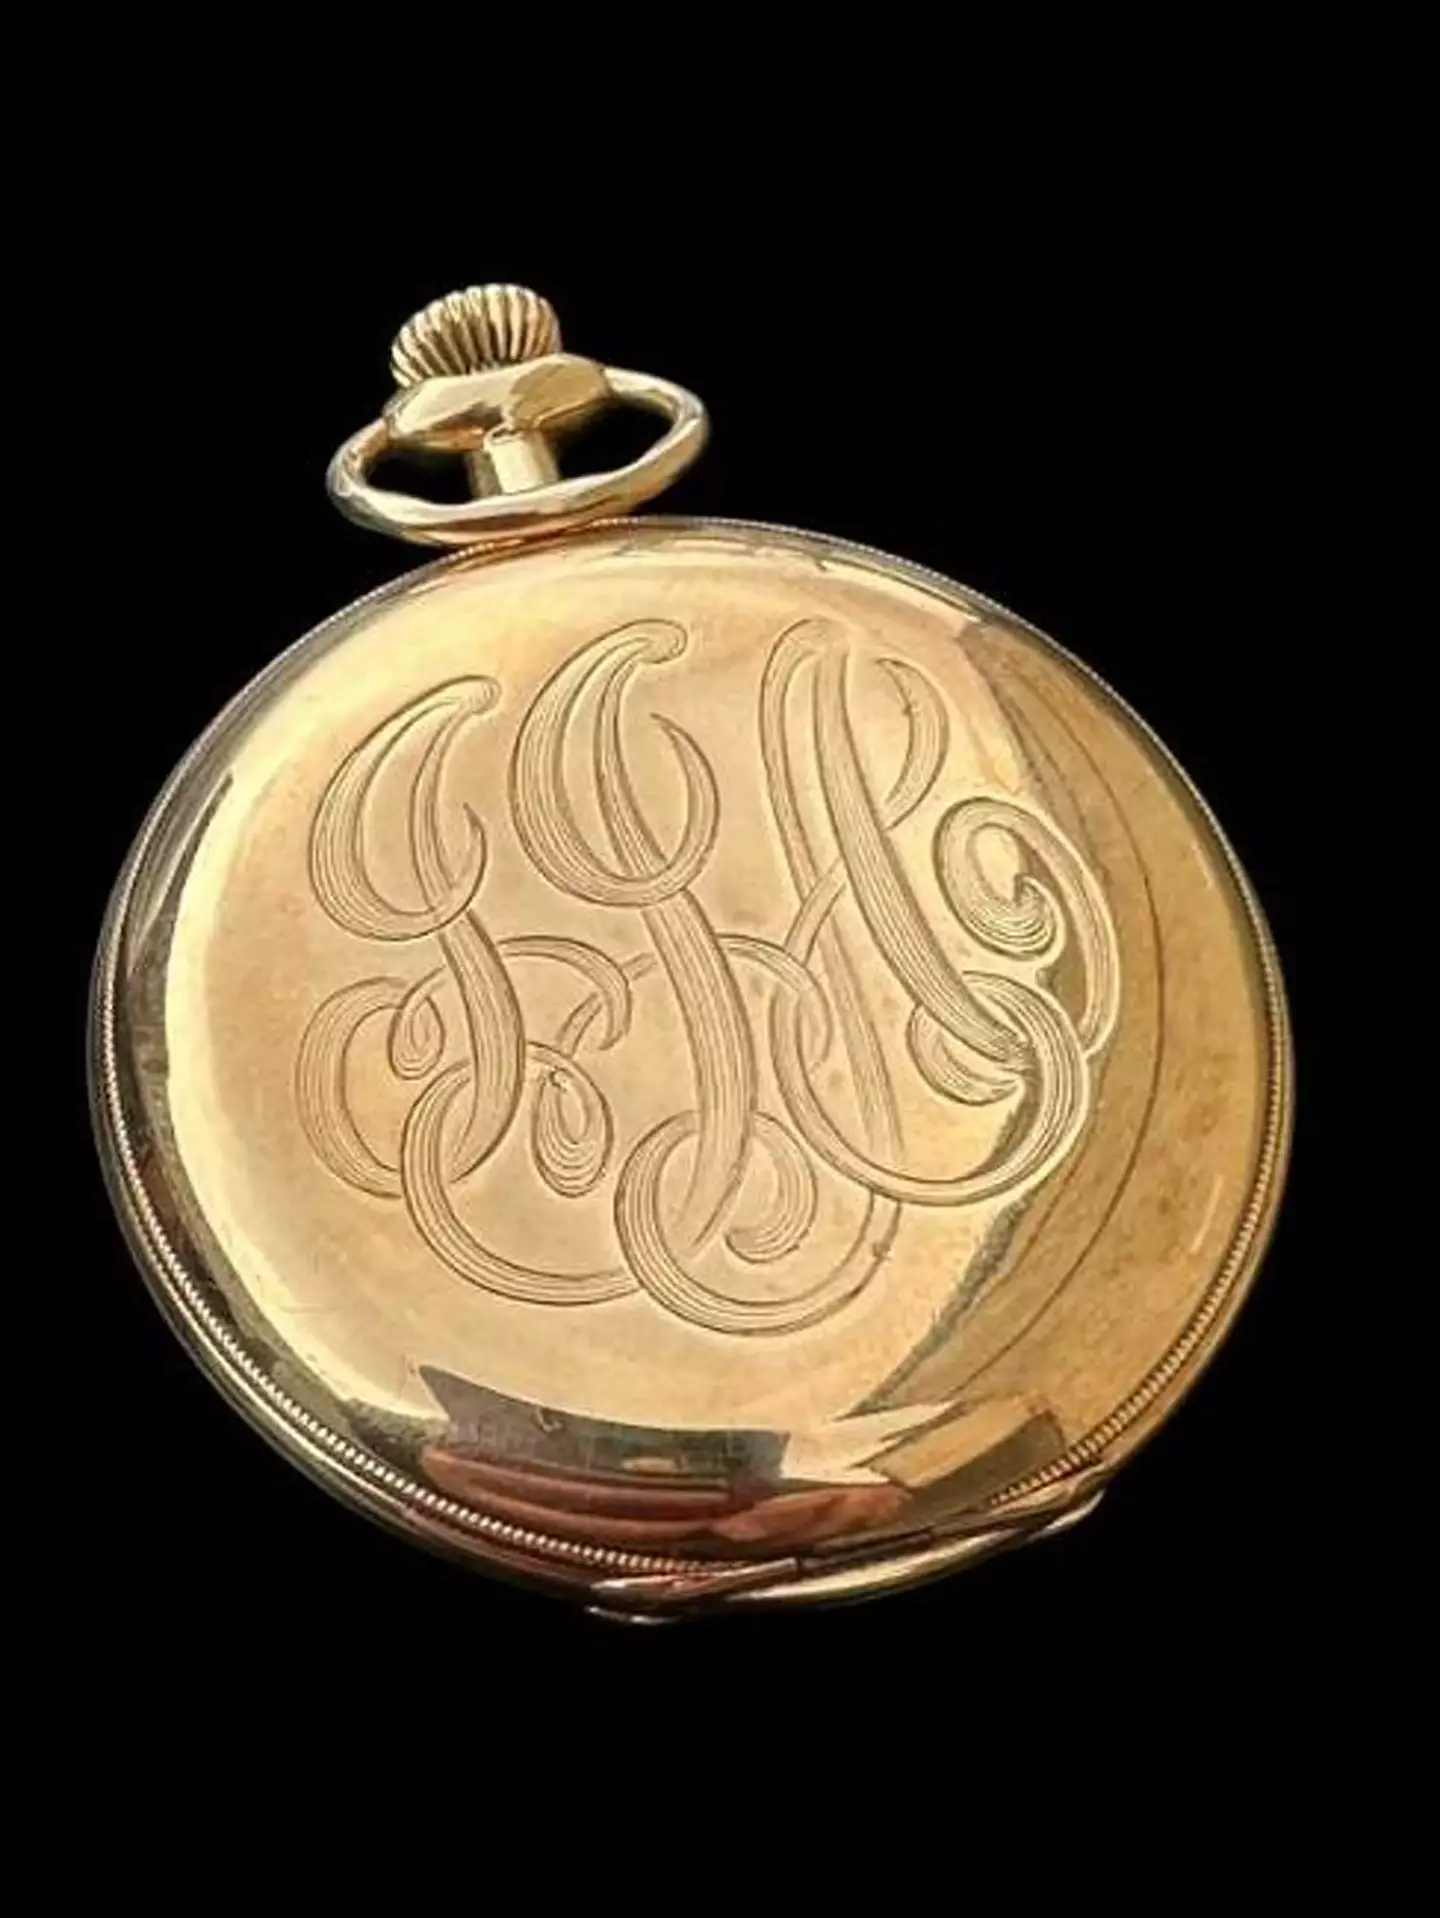 The gold pocket watch sold for over a billion pounds. PA News Agency